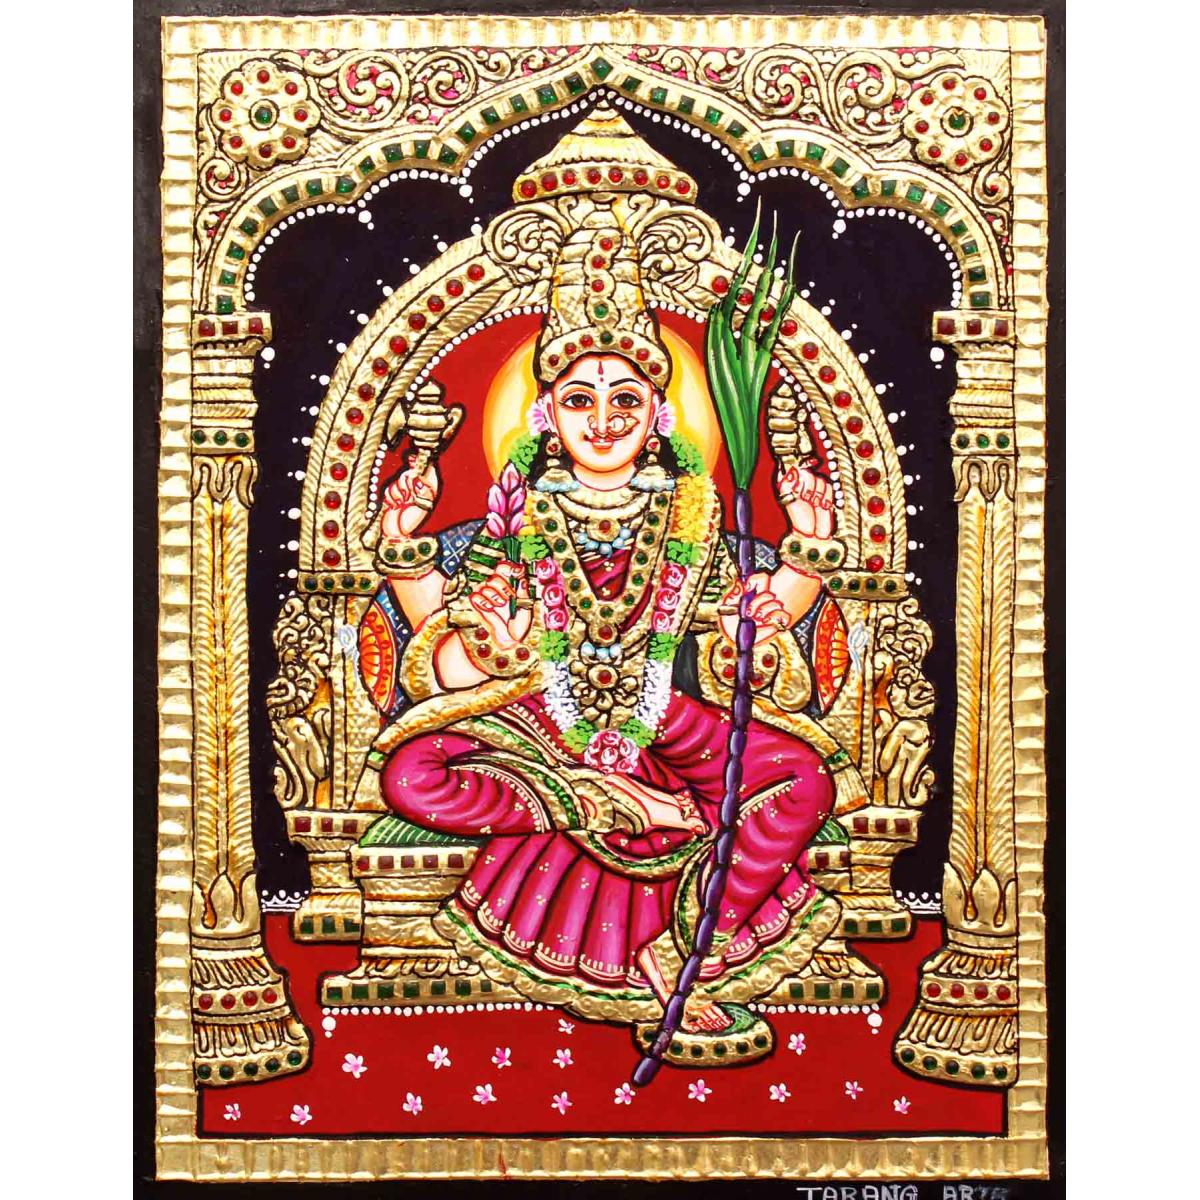 TANJORE PAINTING LALITHA DEVI